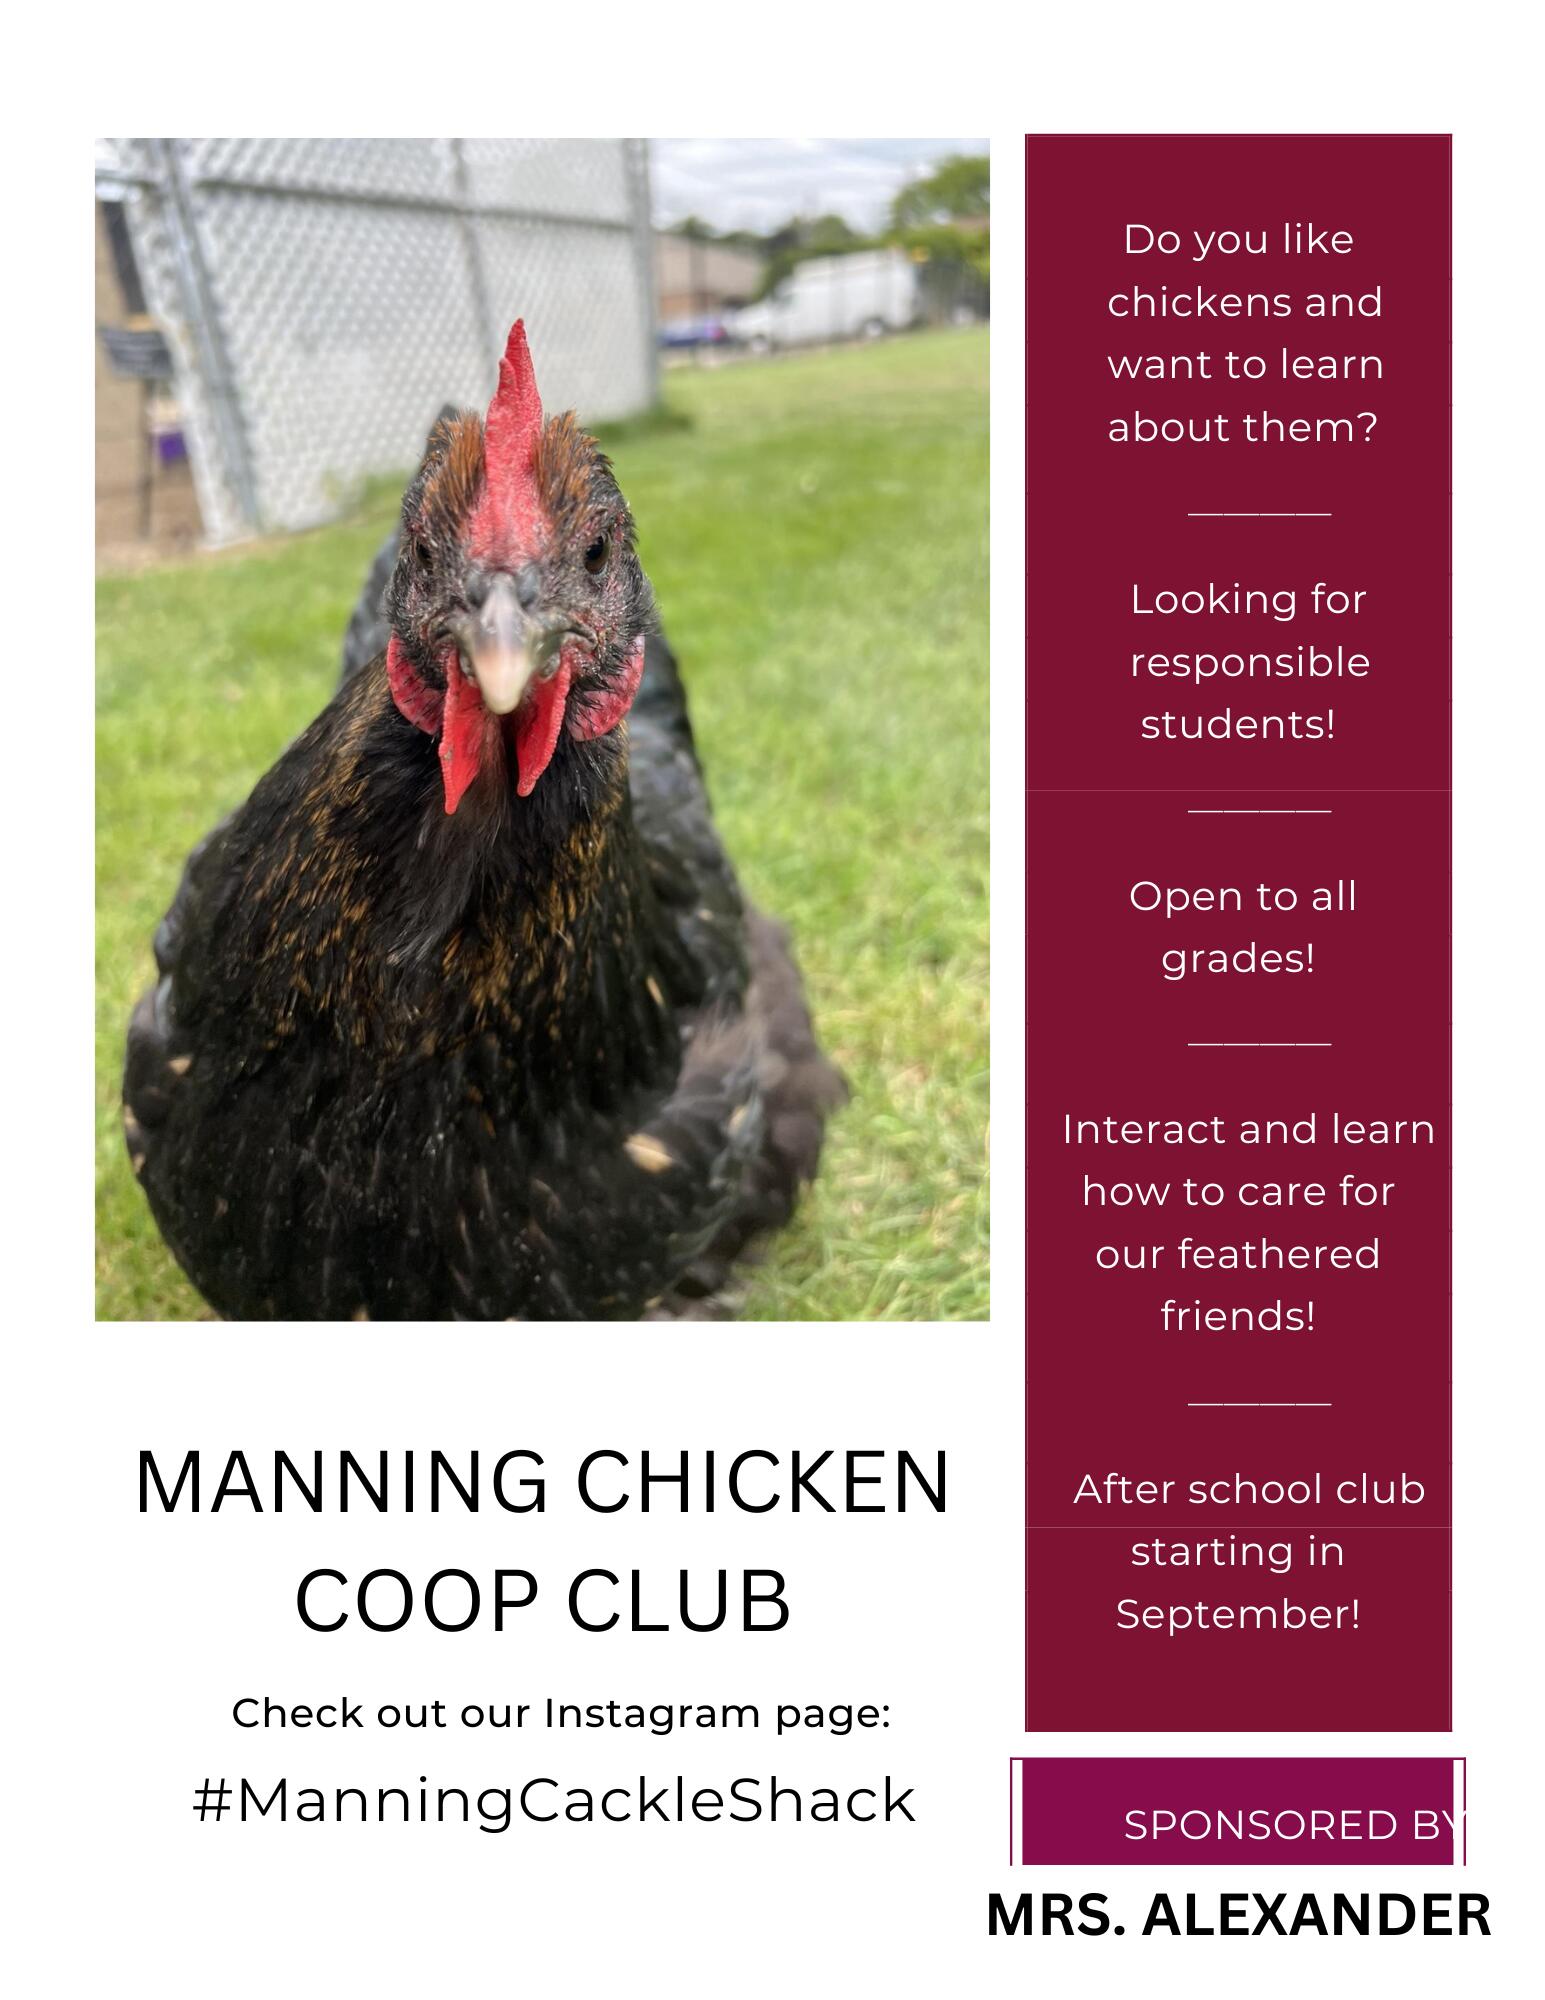 Do you like chickens and want to learn about them?